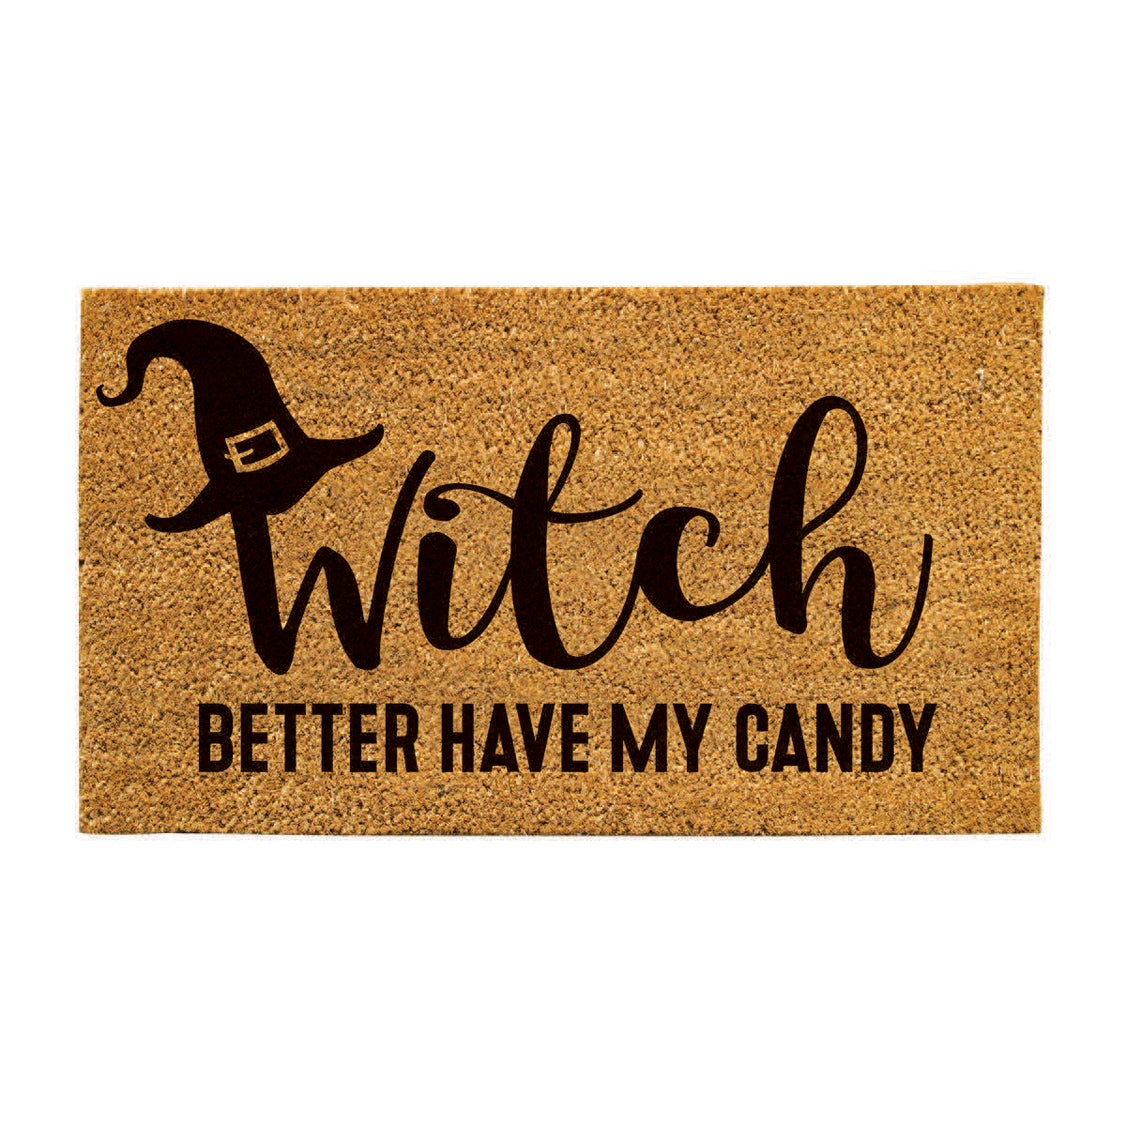 28" x 16" Nature Coir Mat, Witch Better Have my Candy